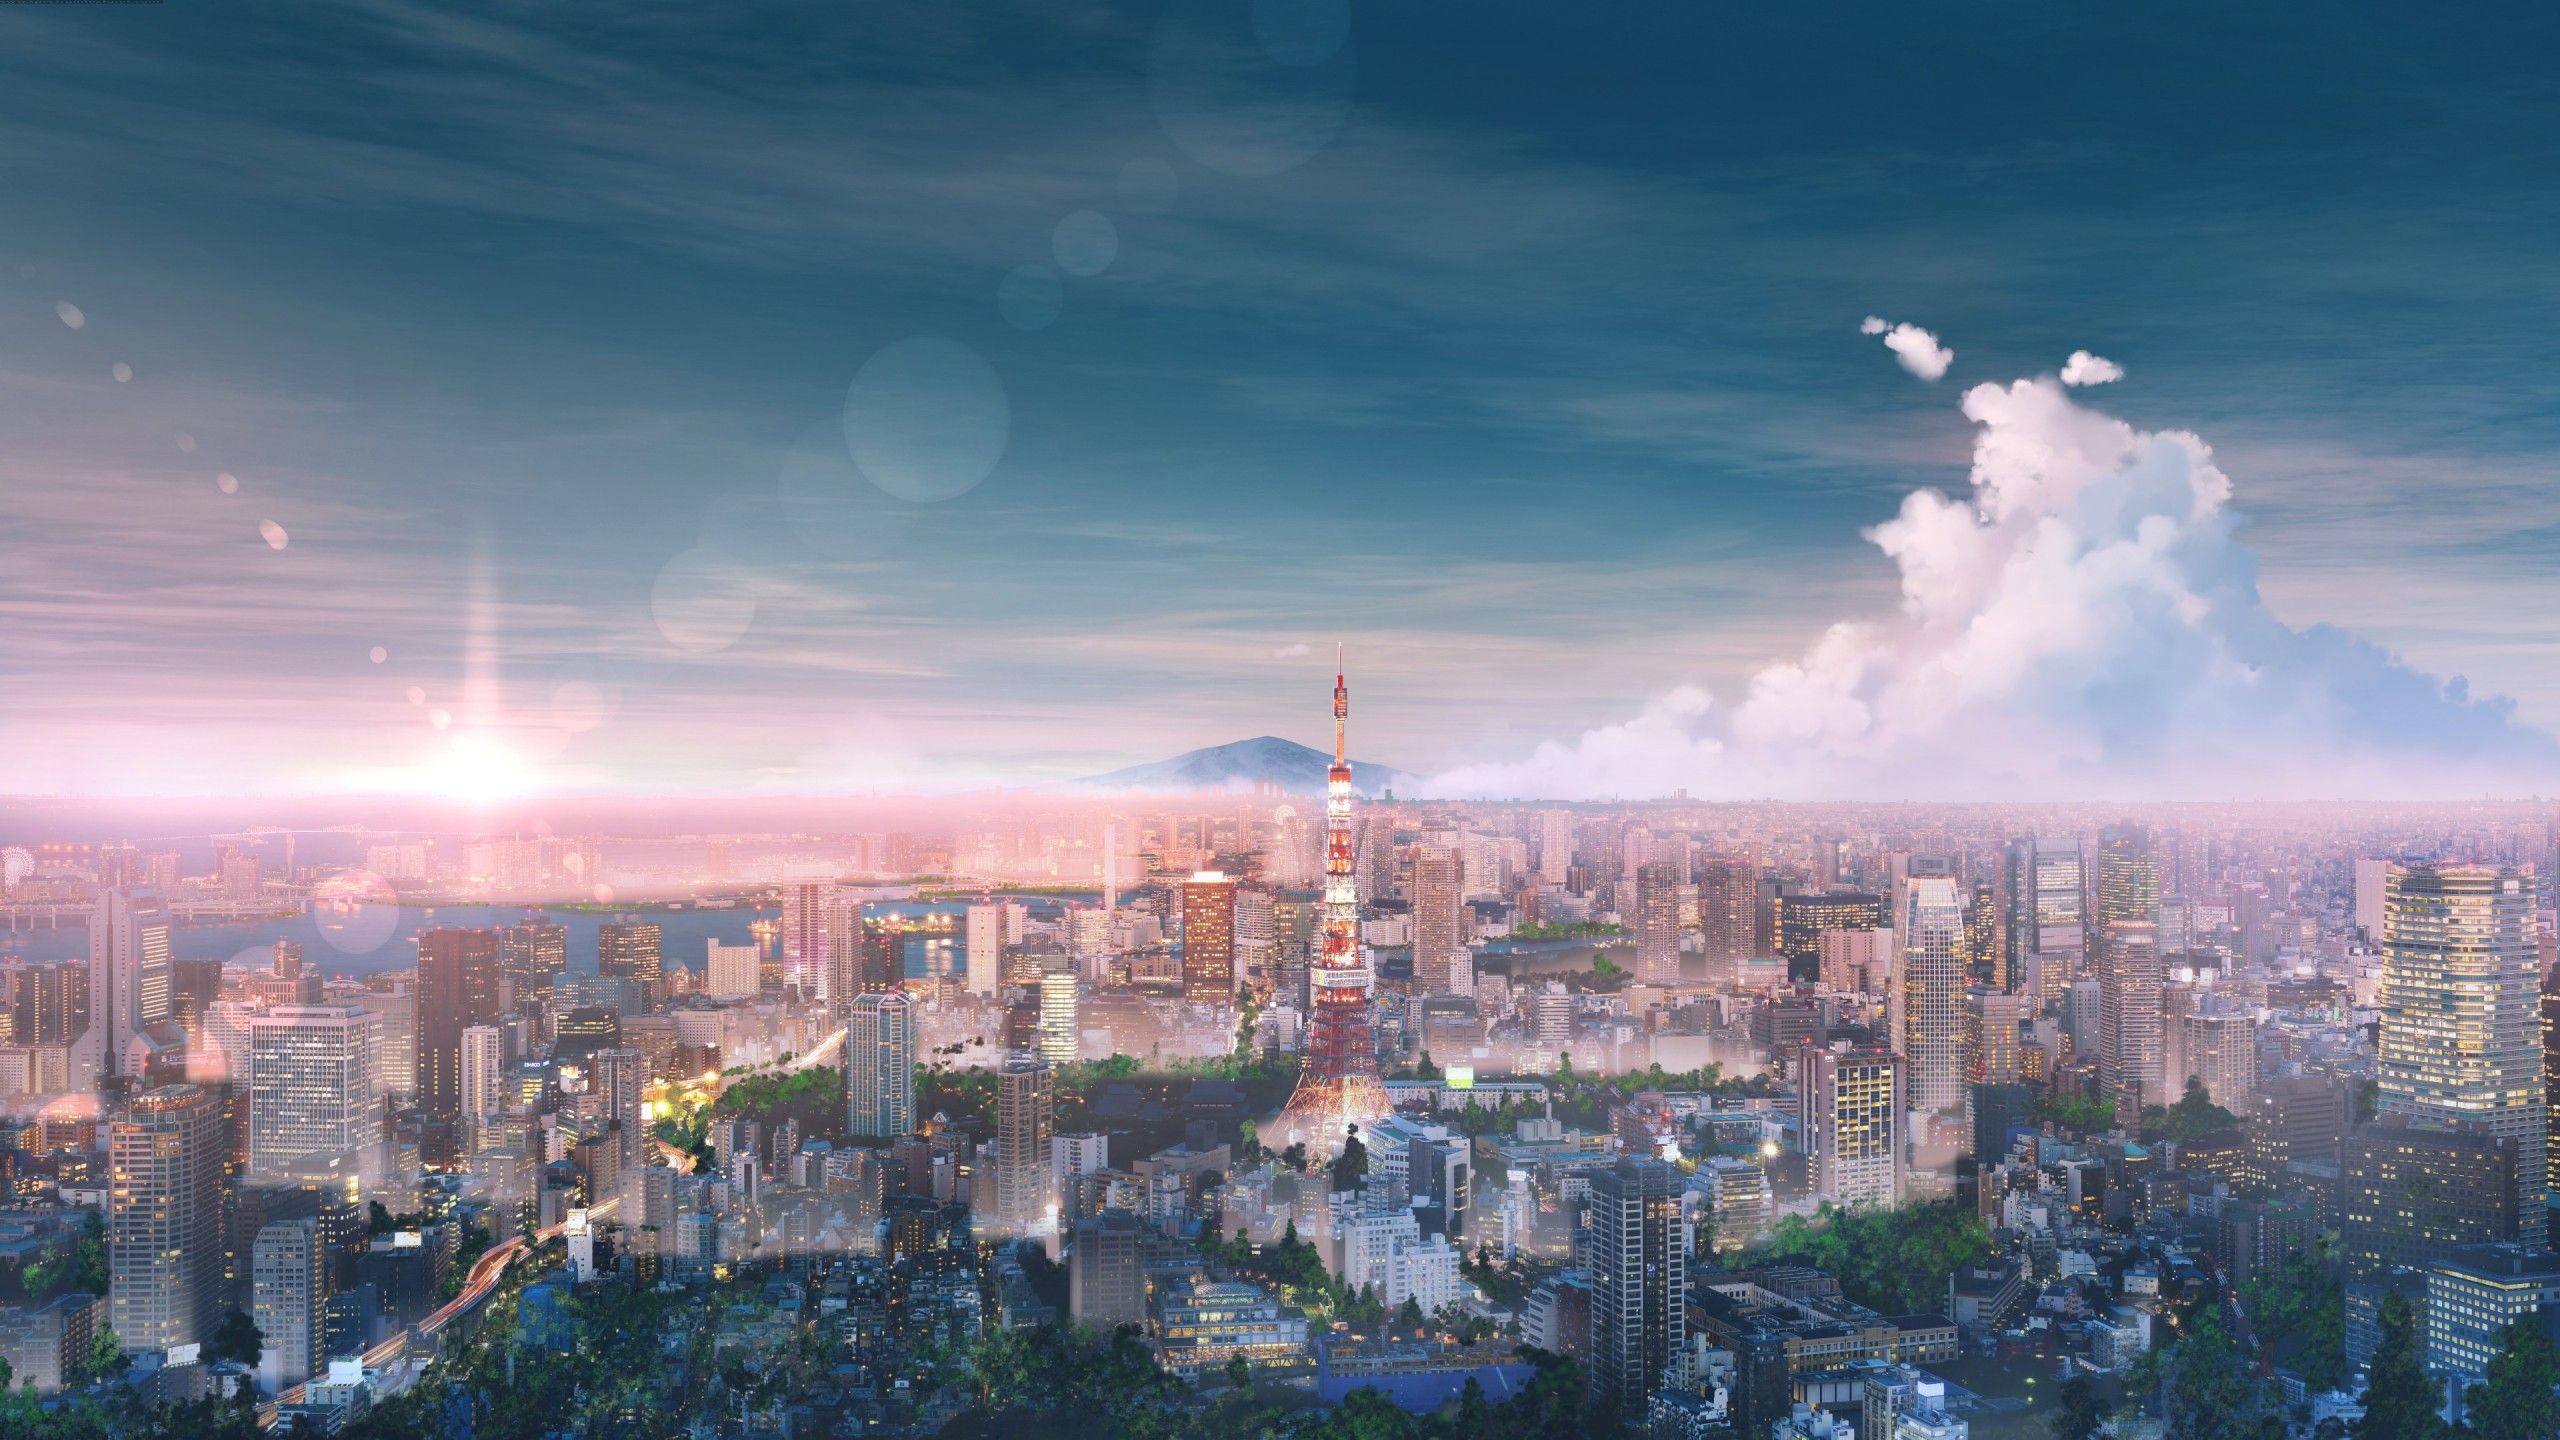 Anime City Lights And City Skyline Image Background, 3d Dark Blue City With  Light Reflection Background For Technology Concept 3d Illustration  Rendering, Hd Photography Photo Background Image And Wallpaper for Free  Download